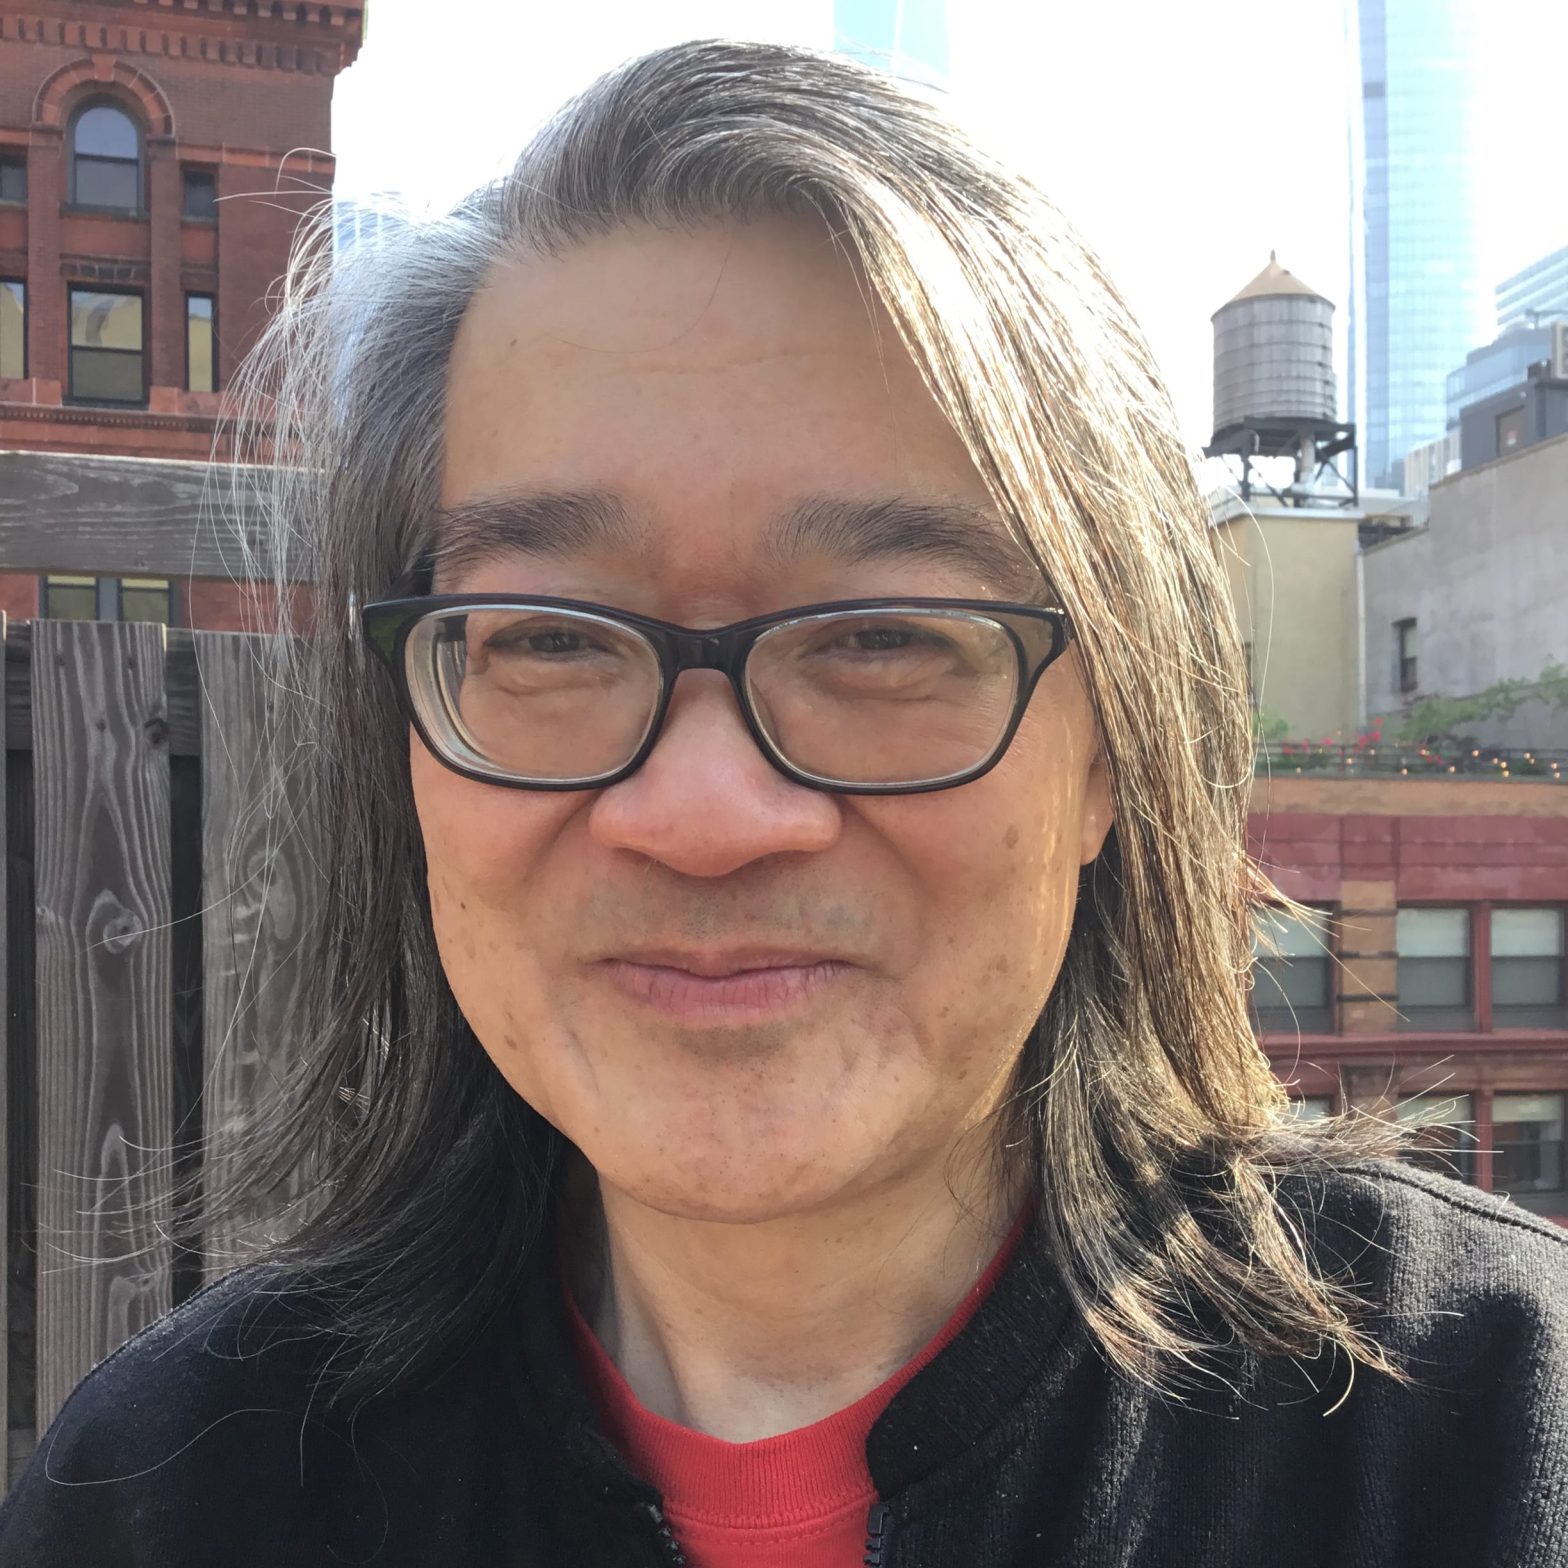 New Memoir by Playwright, Musician Alvin Eng Captures the Heart of the Asian-American Experience